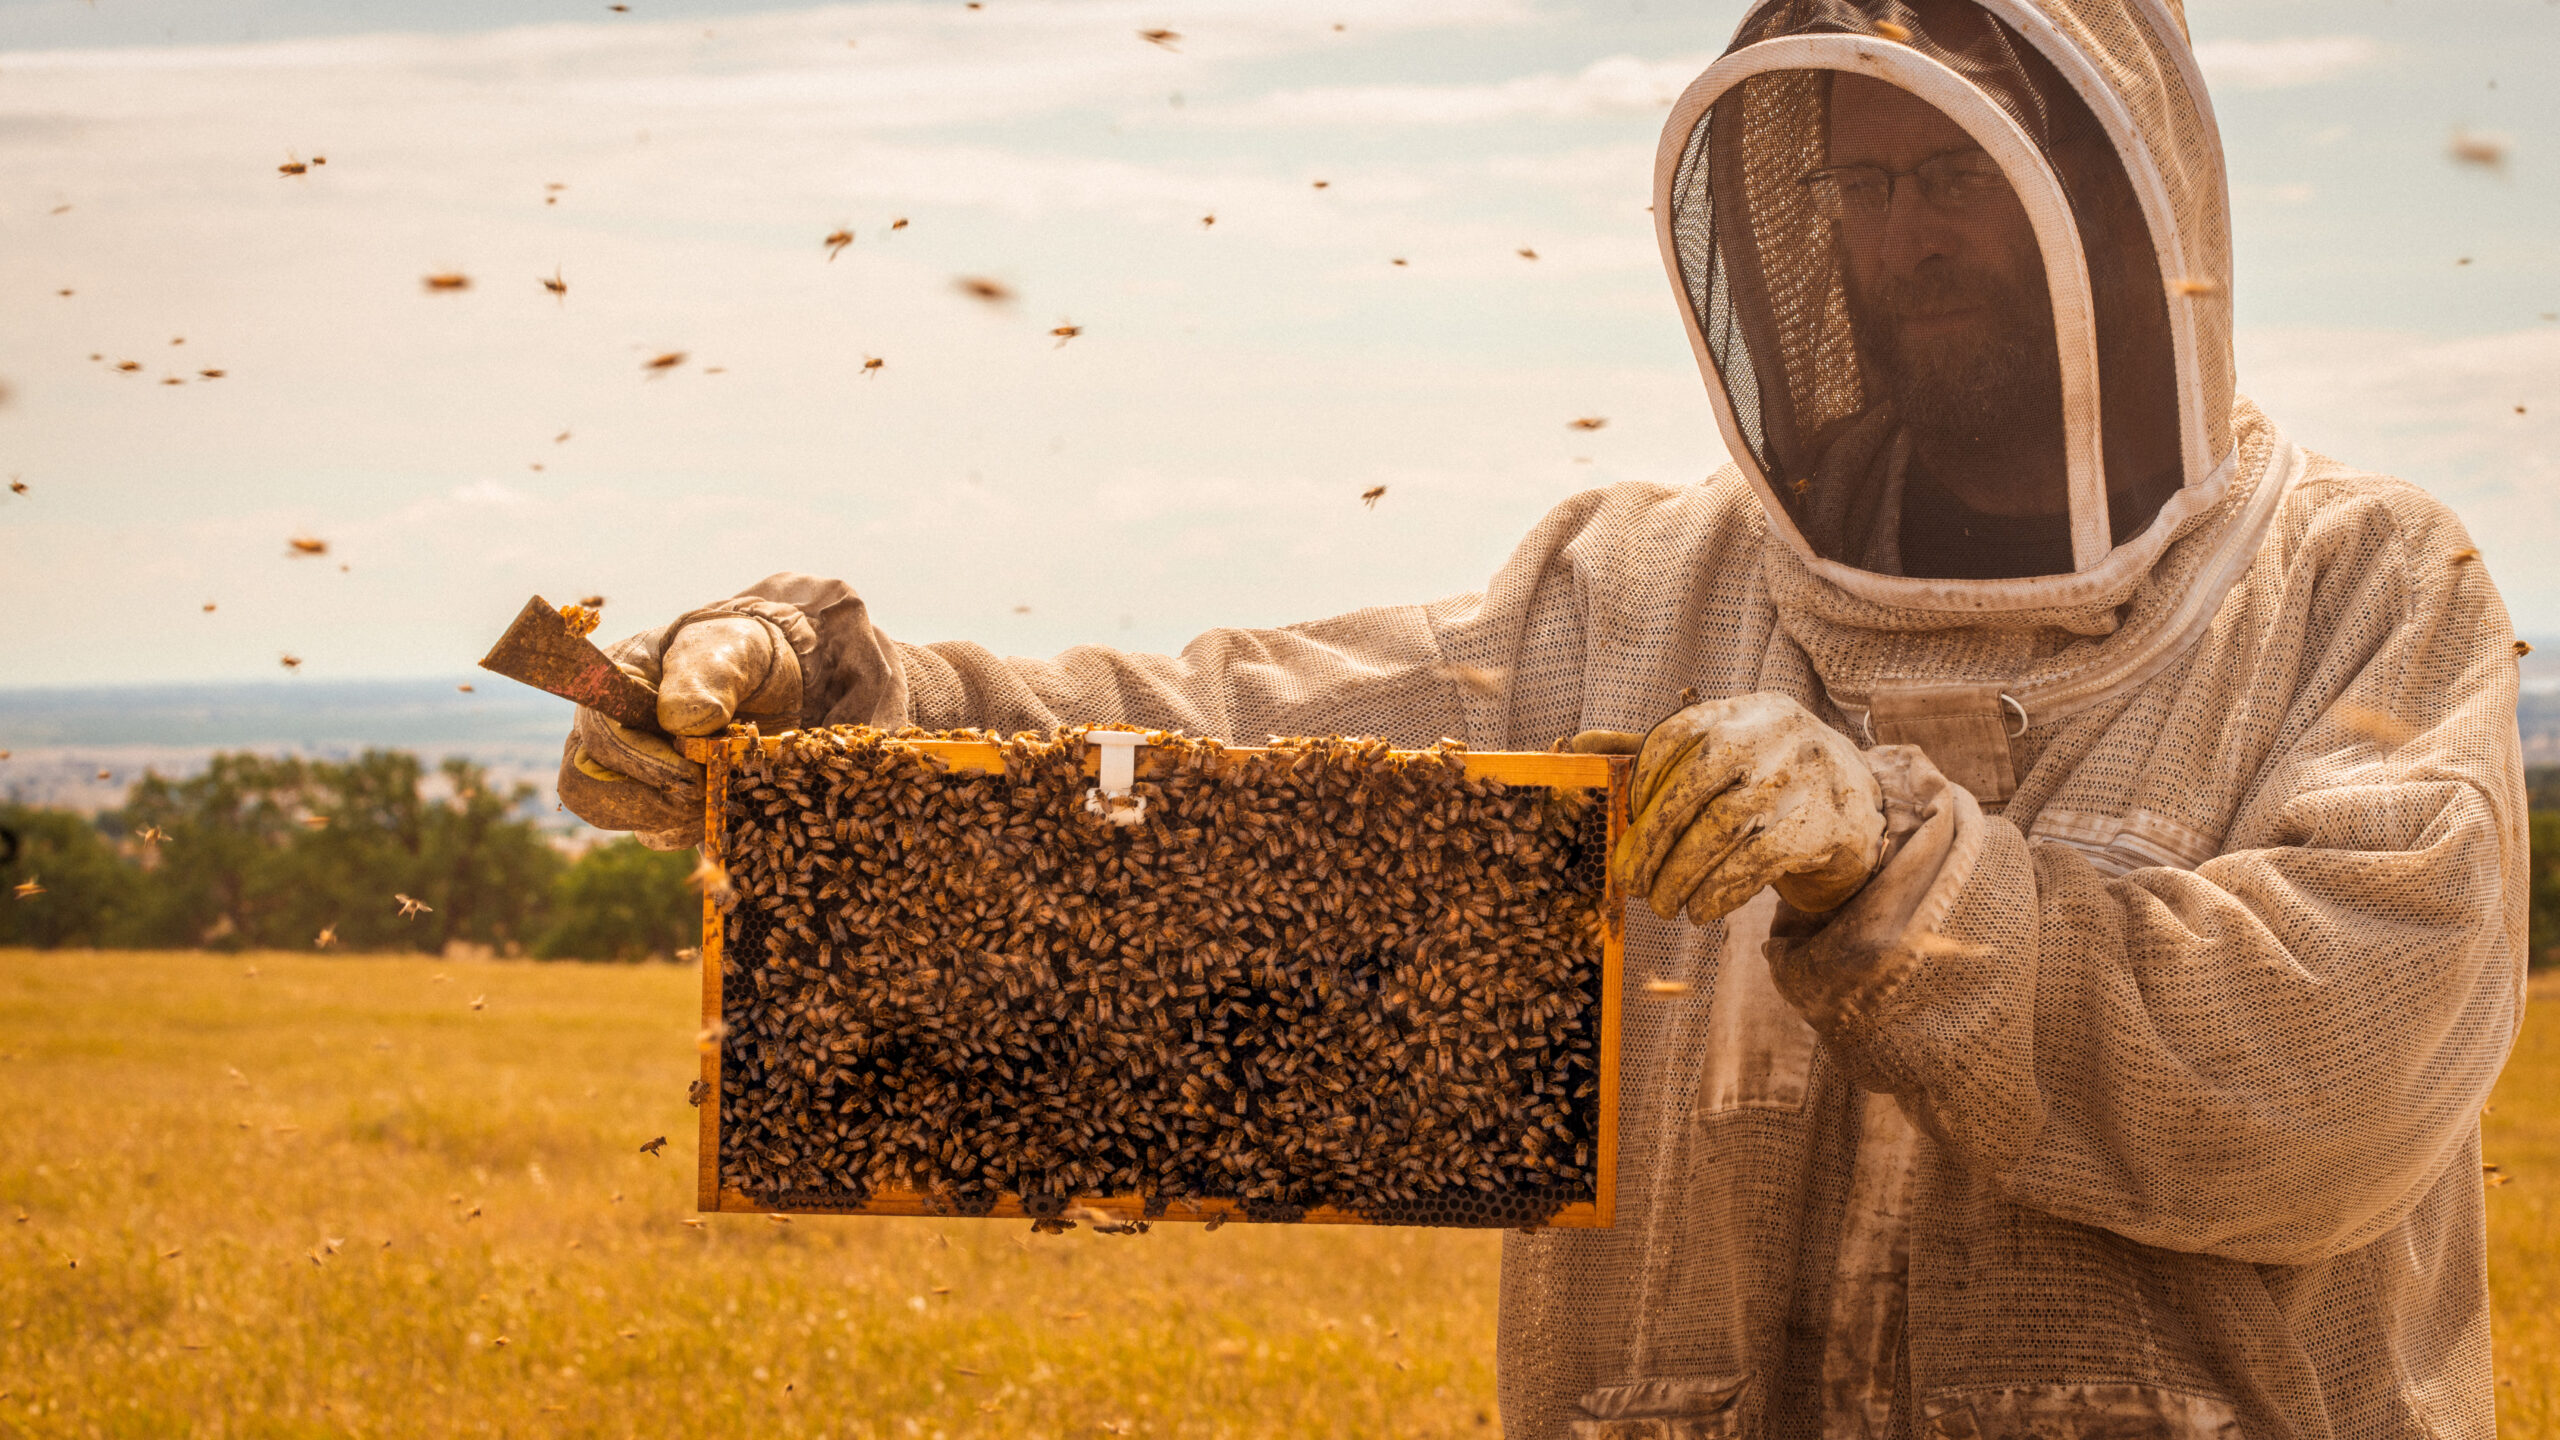 Beekeeper holding up a part of a hive in a field